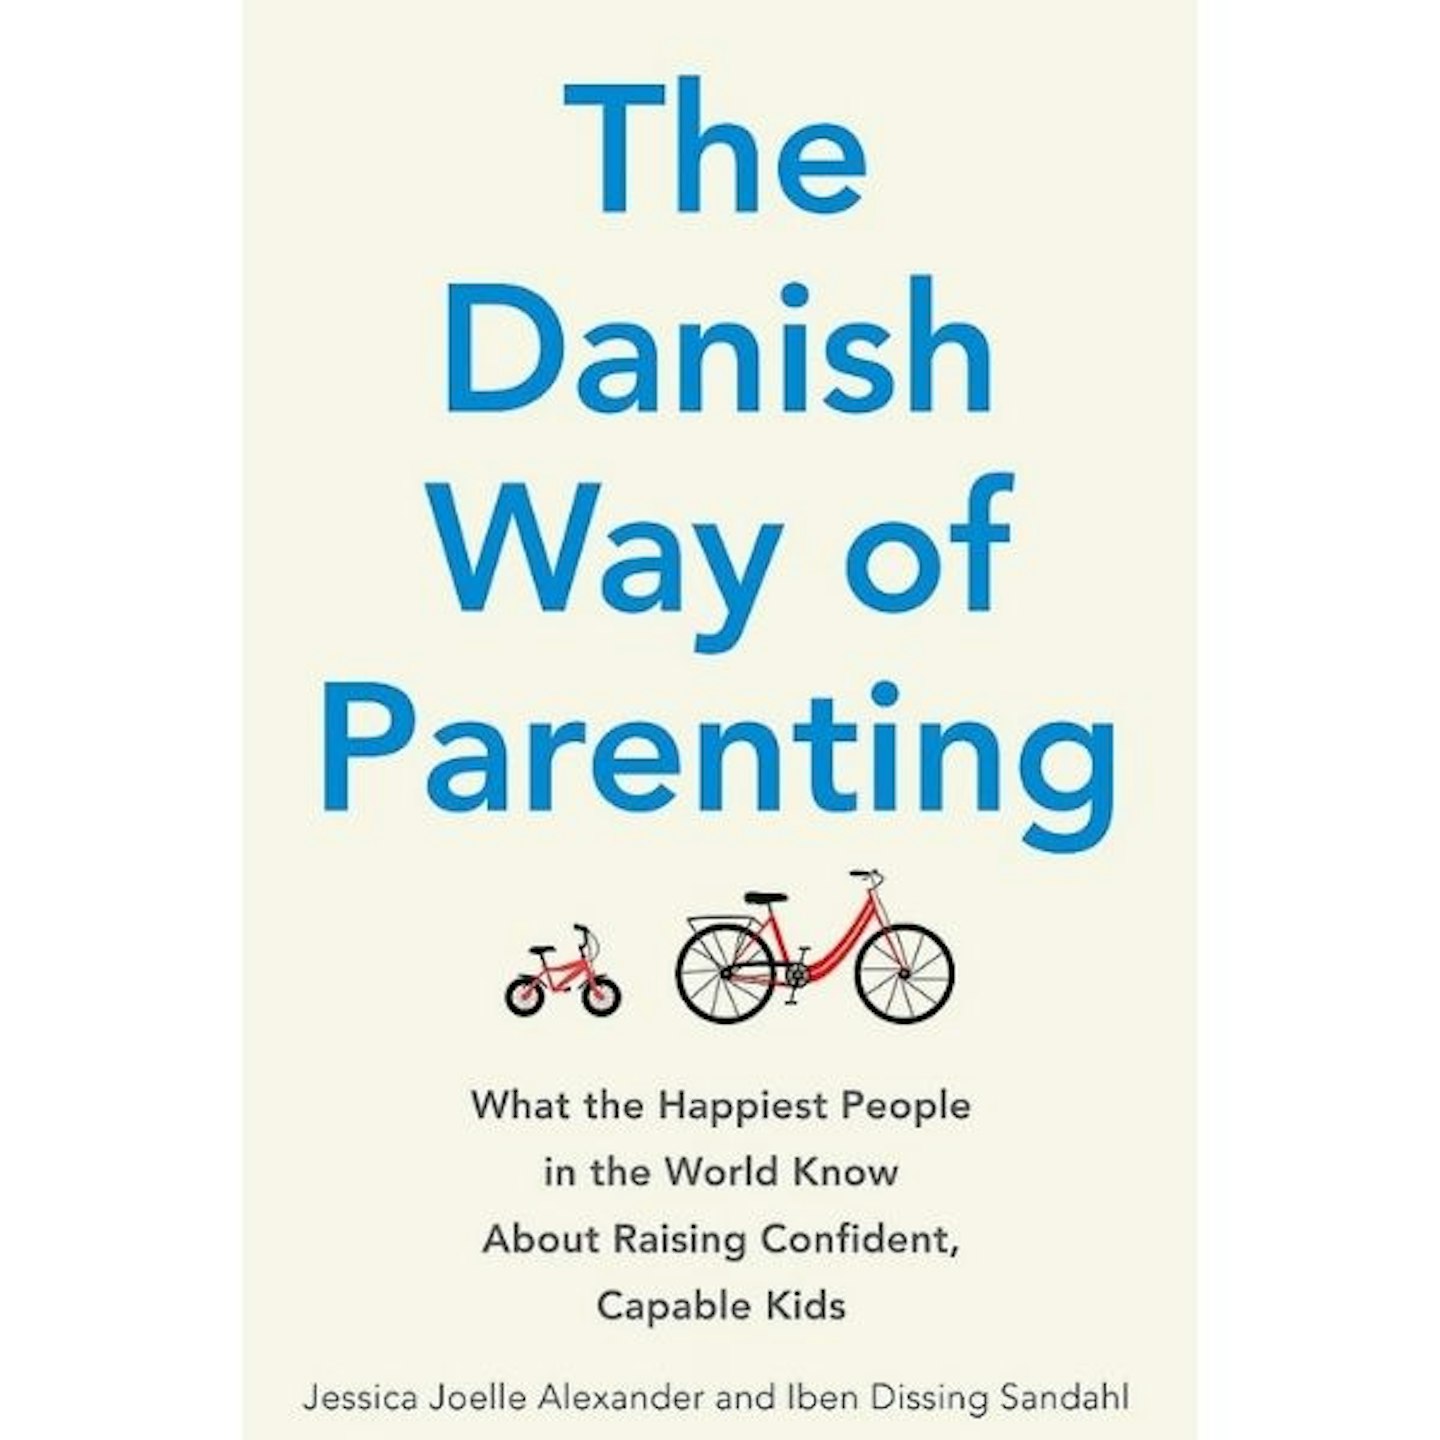 The Danish Way Of Parenting: What The Happiest People In The World Know About Raising Confident, Capable Kids, By Jesica Joel Alexander And Iben Dissing Sandahl